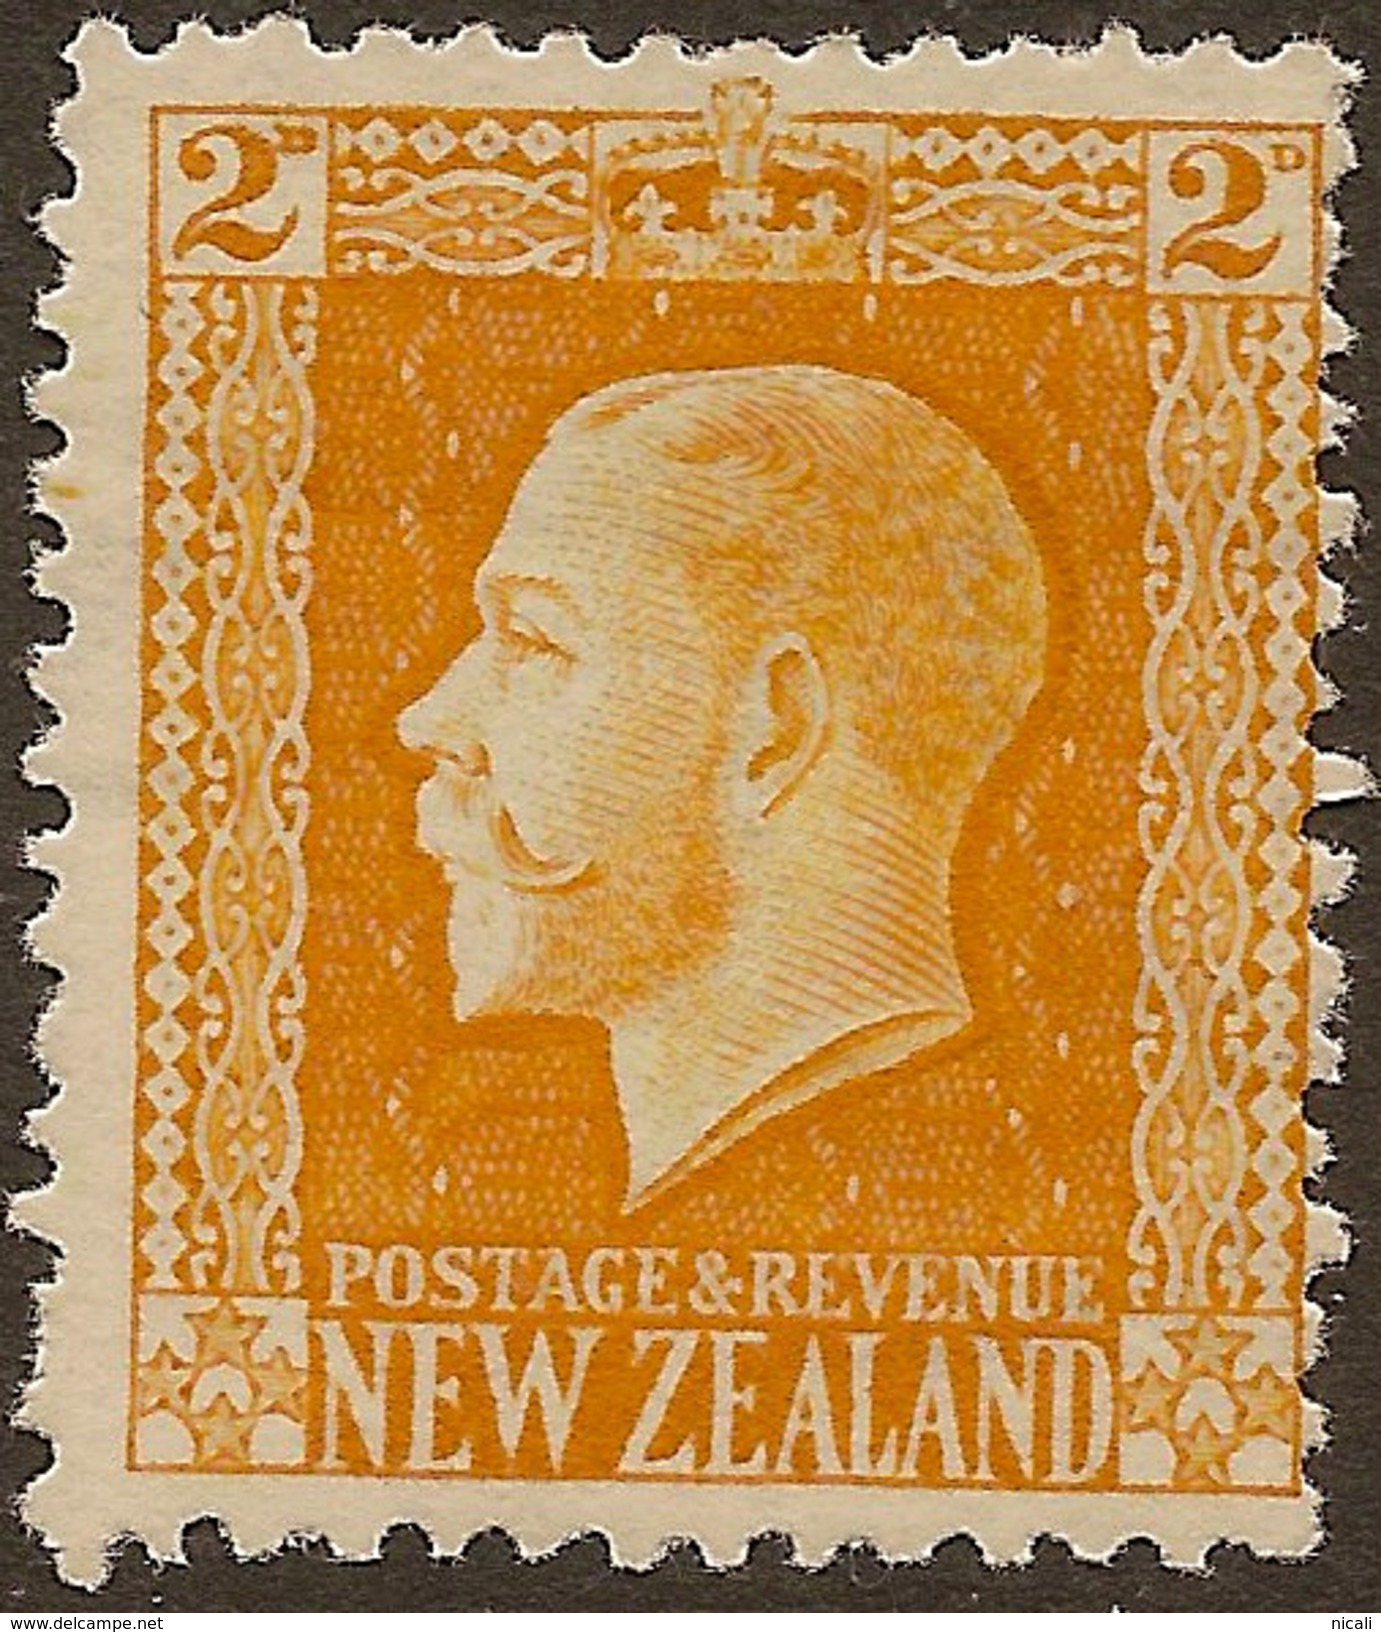 NZ 1915 2d Yellow KGV P14x14.5 SG 418a HM #YS333 - Unused Stamps